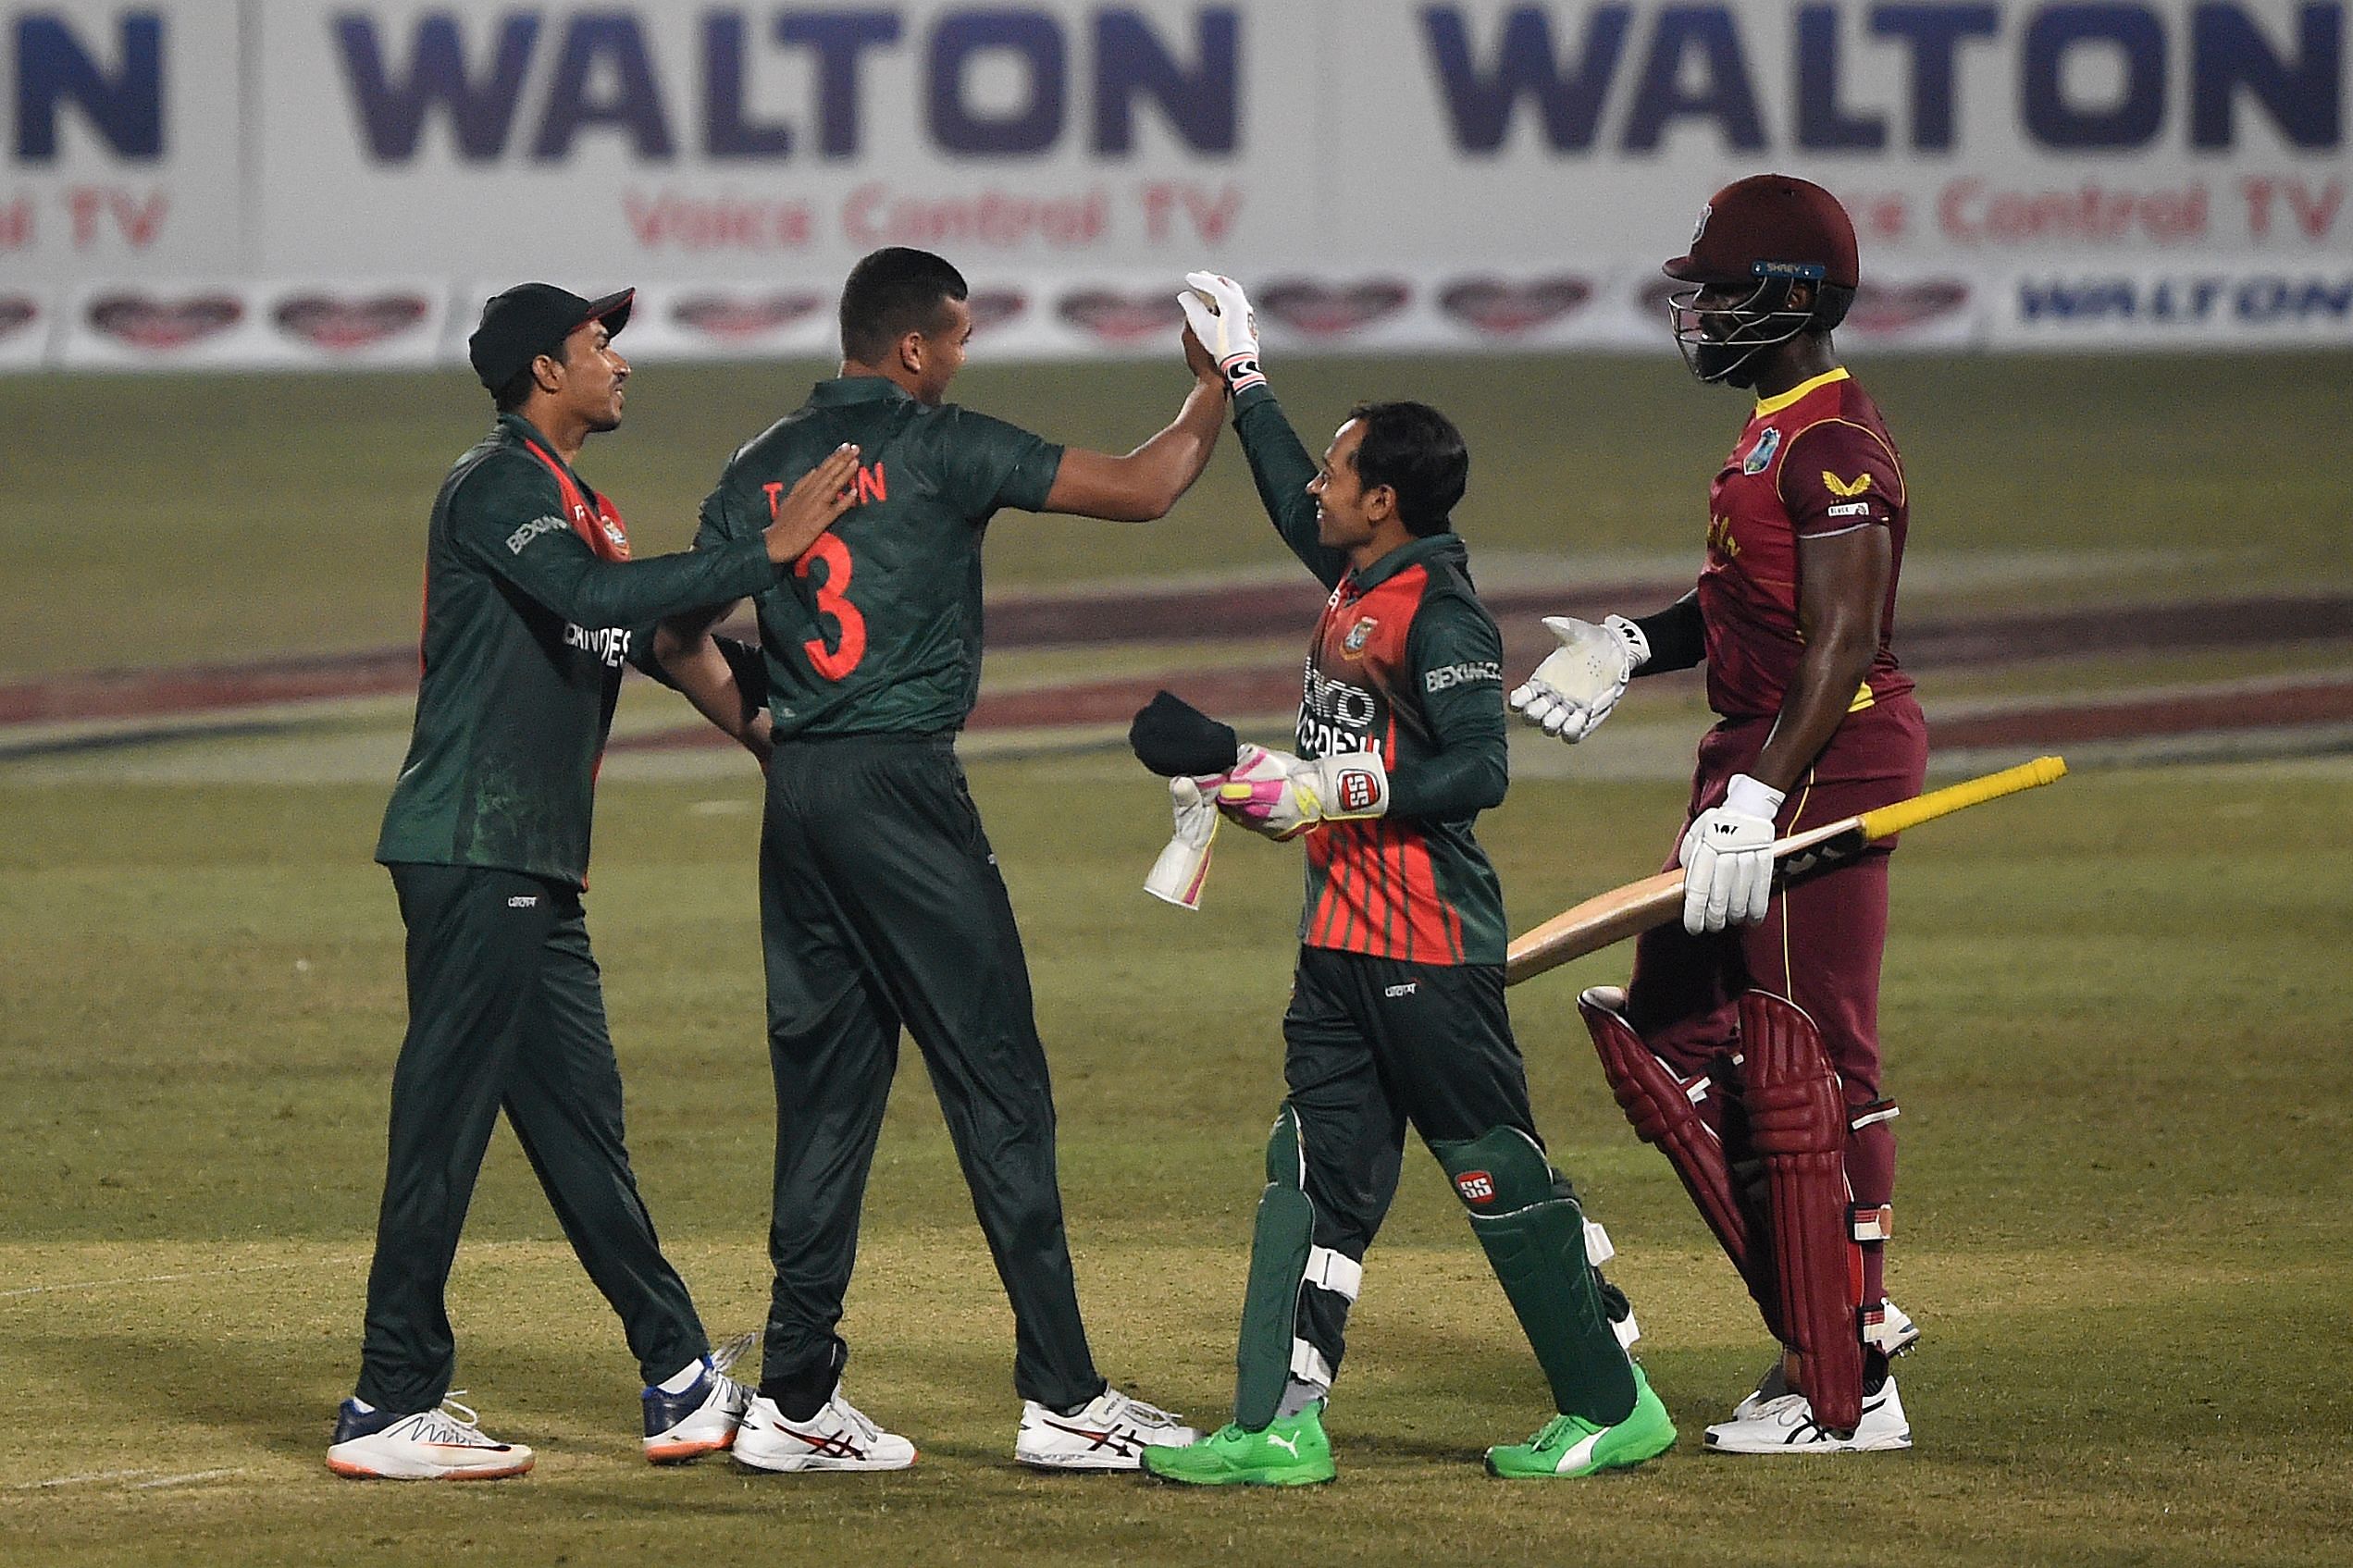 Bangladesh's players celebrate after the dismissal of West Indies' Raymon Reifer (R) during the third and final one-day international (ODI) cricket match between Bangladesh and West Indies. Credit: AFP Photo